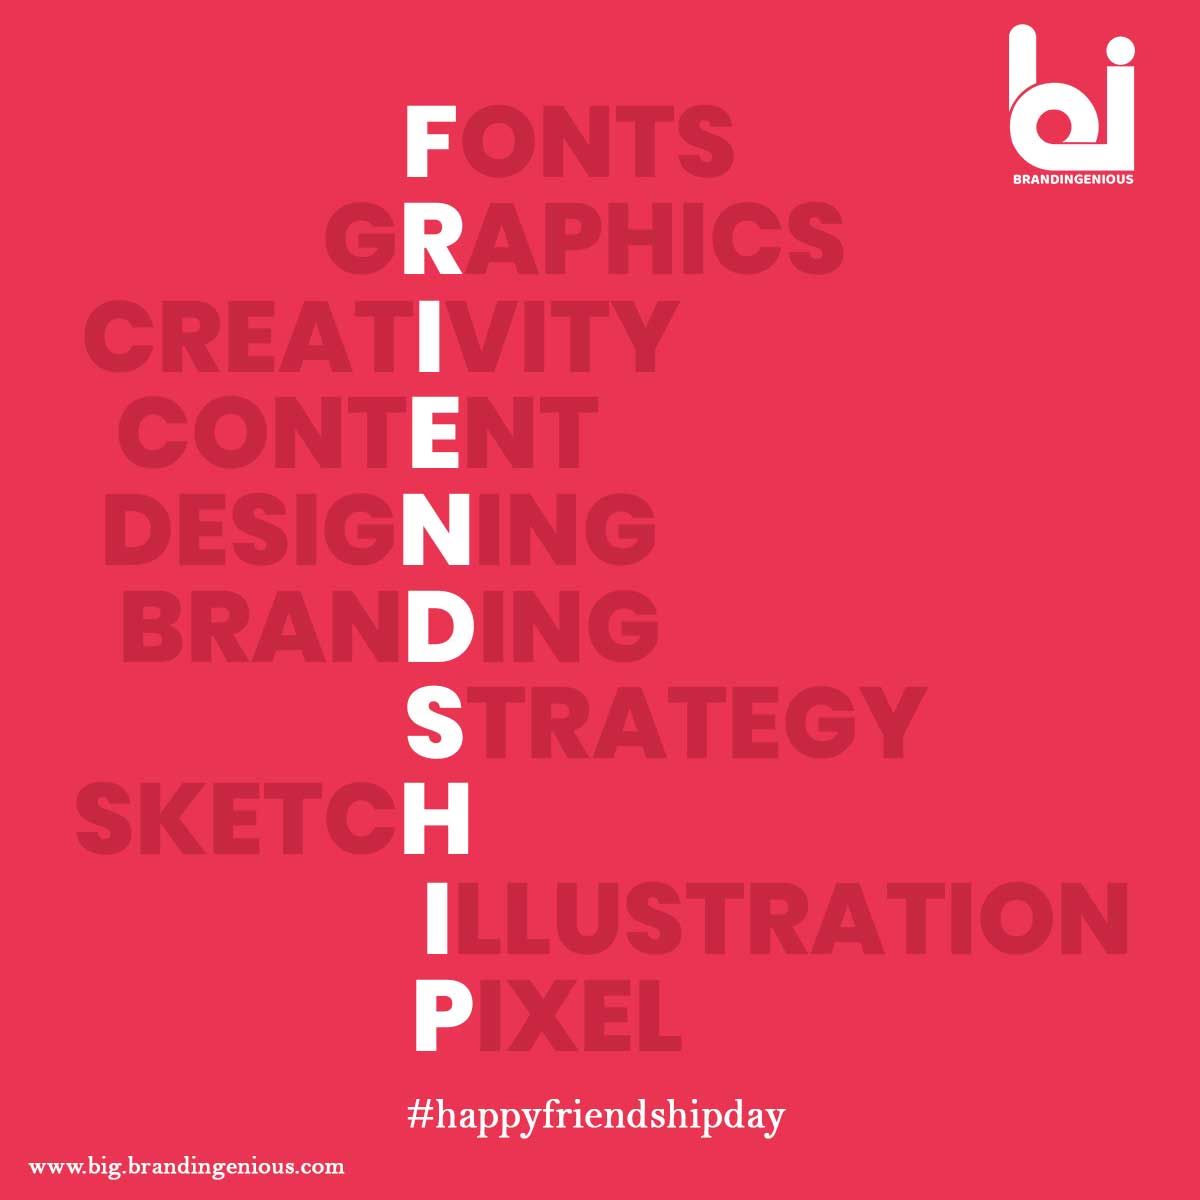 Wishing you a very happy #FriendshipDay
#friendship #friendshipgoals #Friendsgiving #friends4ever #friendgoals #friendshipneverends #bff #friendsforlife #friendsforever #friendshipday2023 #friendsforlife #bestfriends #bestfriendsforever  #Brandingenious #brandingeniousdm